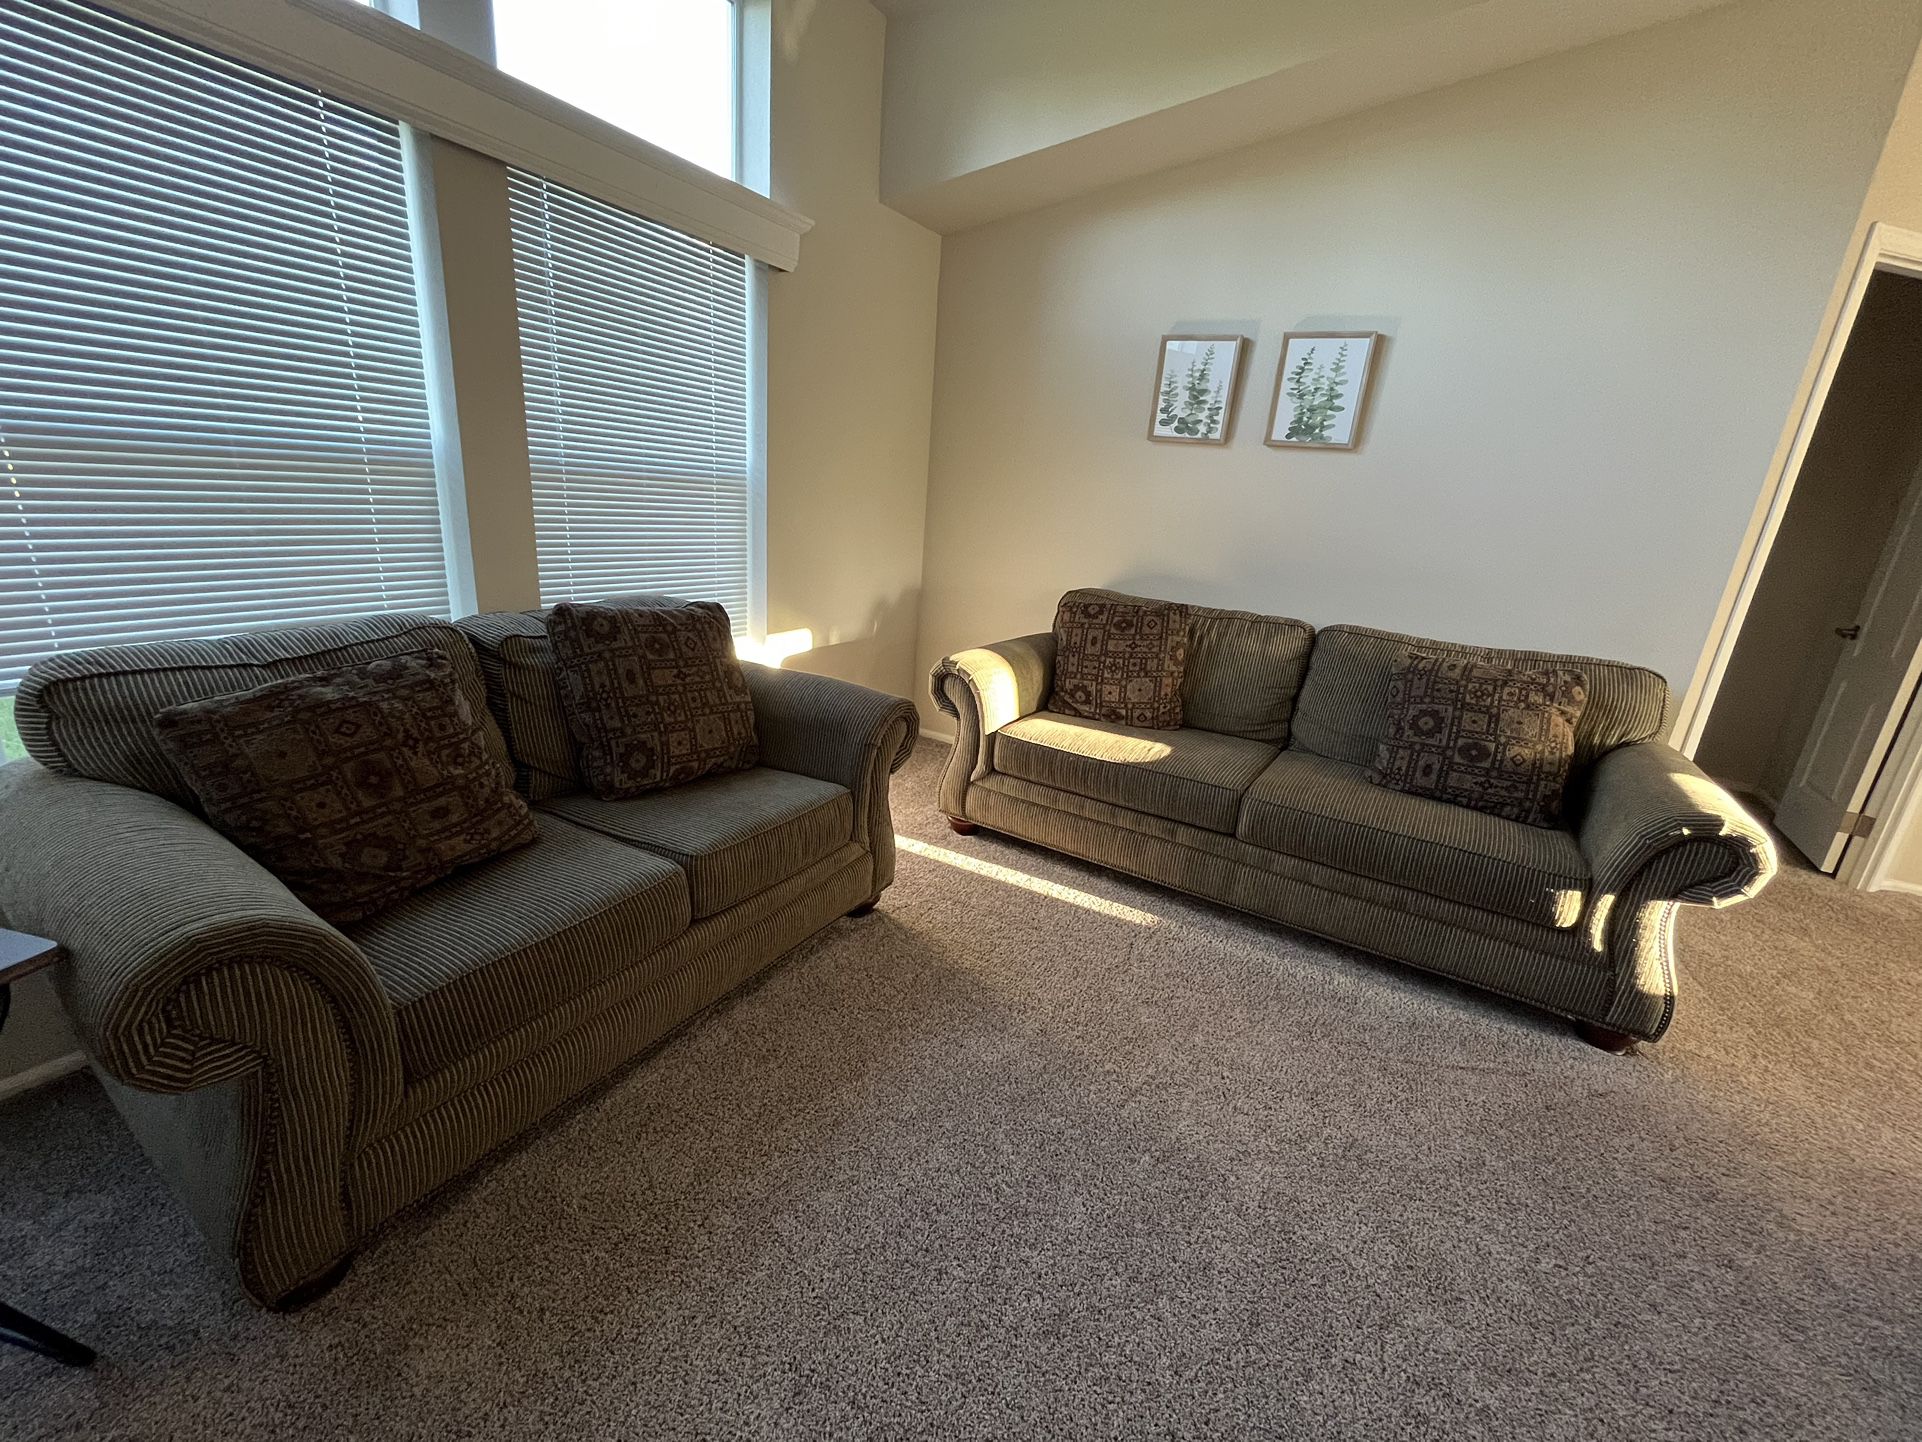 Couch Set With Pillows 